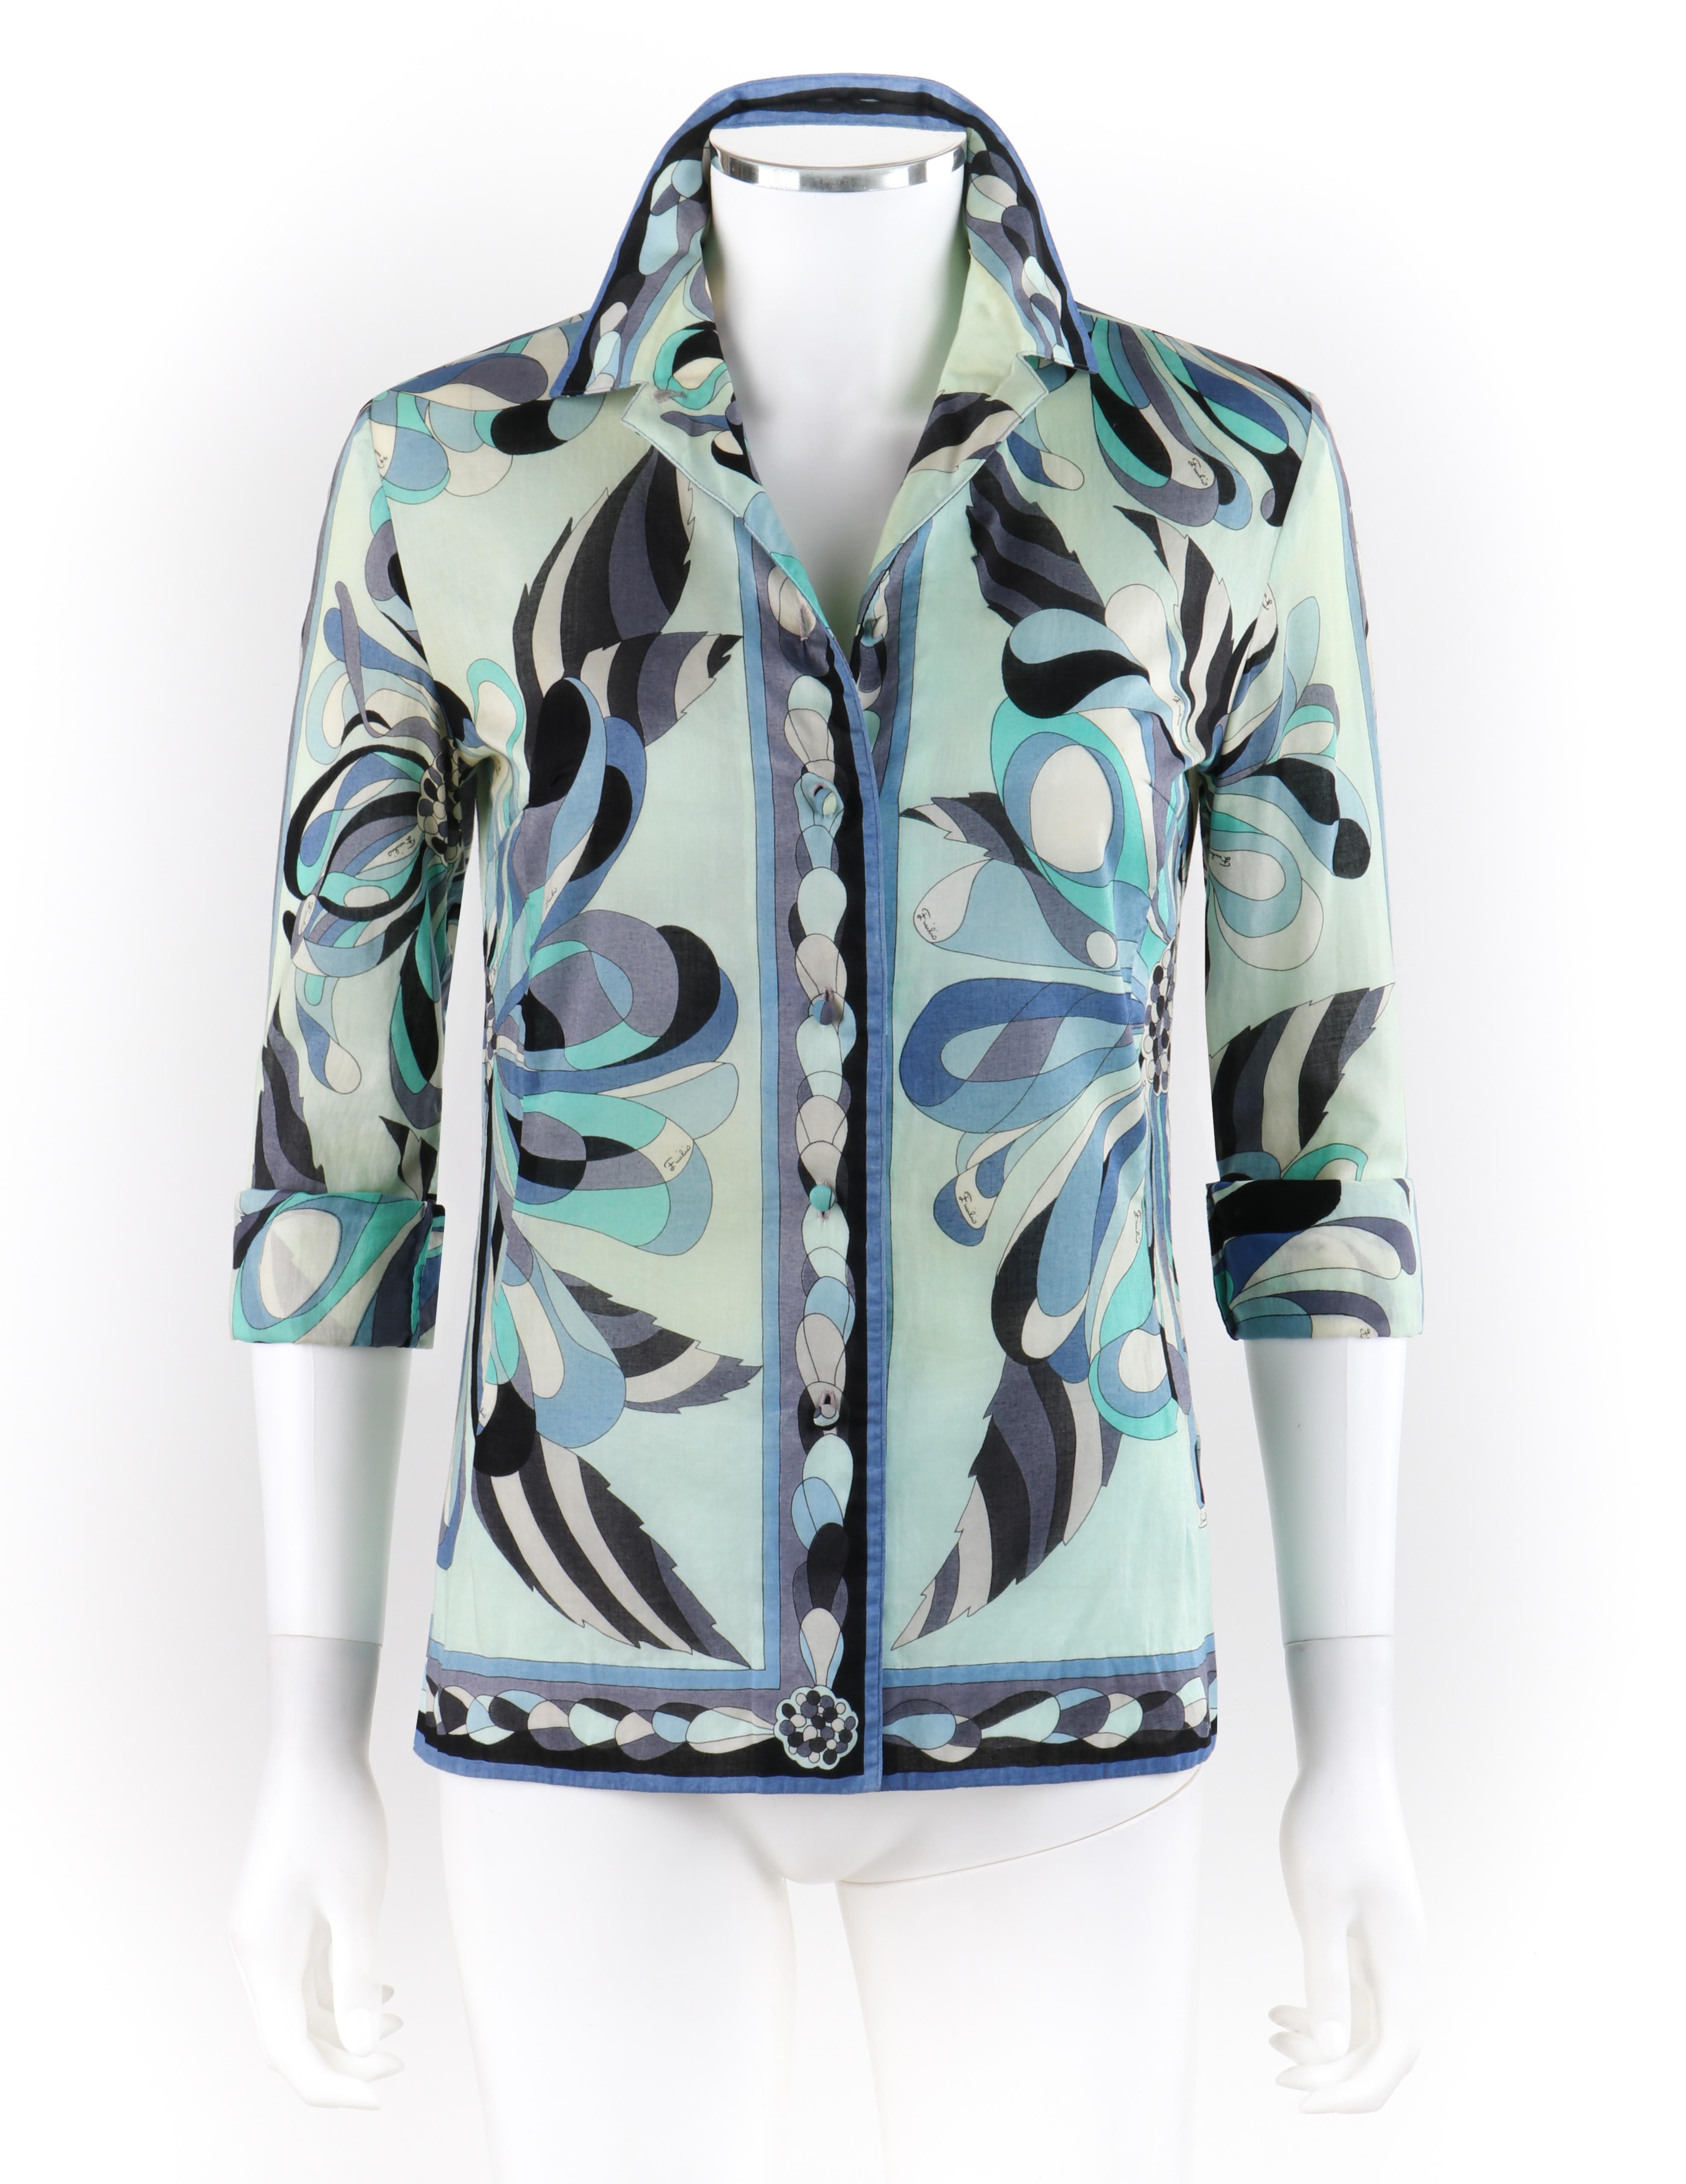 EMILIO PUCCI c.1960’s Turquoise Floral Signature Print Button Front Shirt Top
 
Circa: 1960’s
Label(s): “Emilio Pucci”, “Exclusively for Saks Fifth Avenue”
Designer: Emilio Pucci
Style: Long sleeve button-down top
Color(s): Shades of blue,